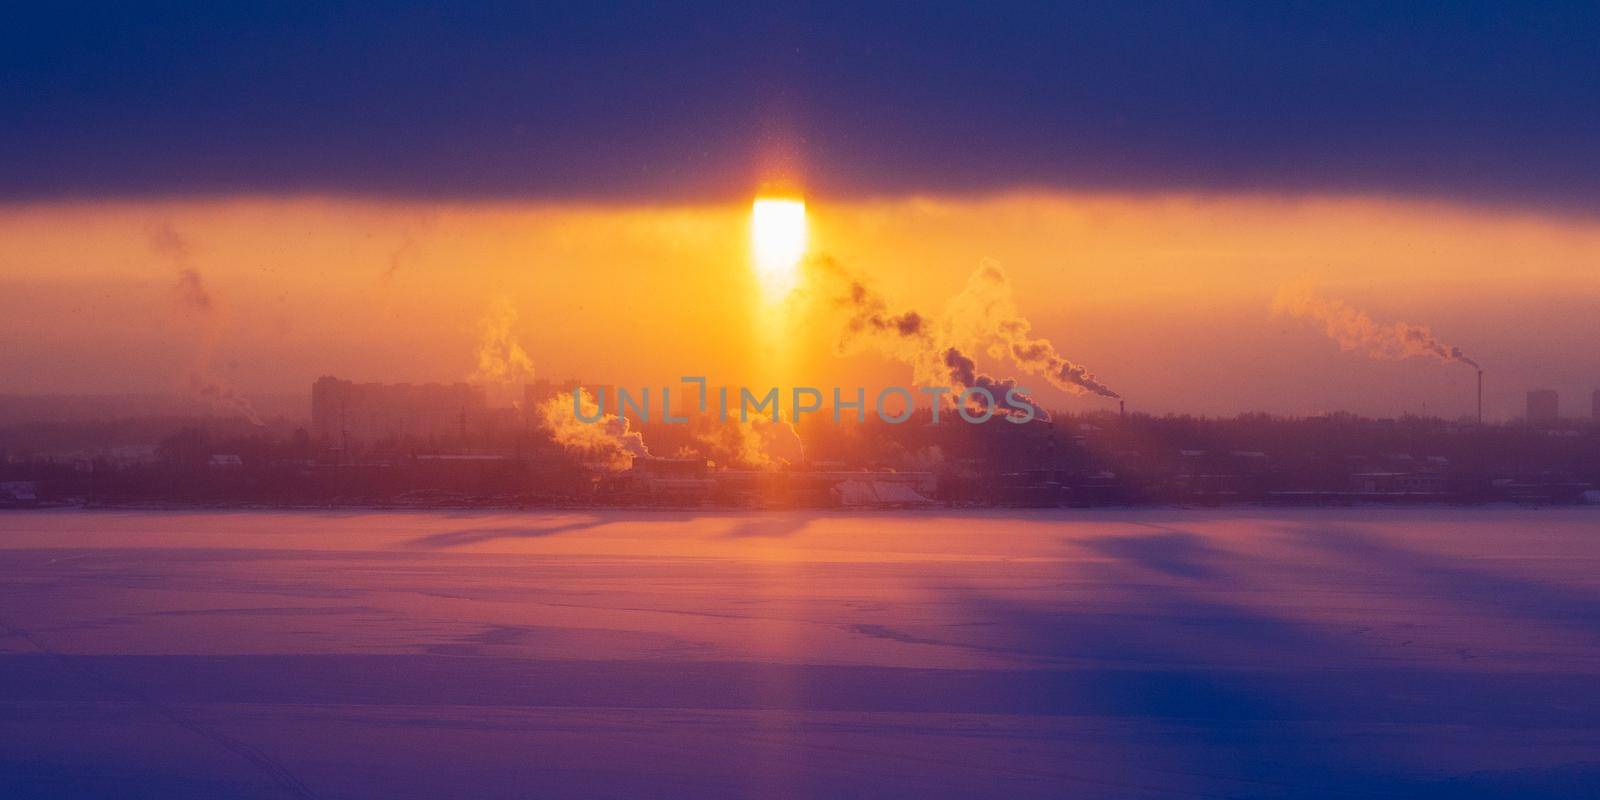 Chimneys of a factory with smoke and steam on a red sunset in the background. by Andre1ns